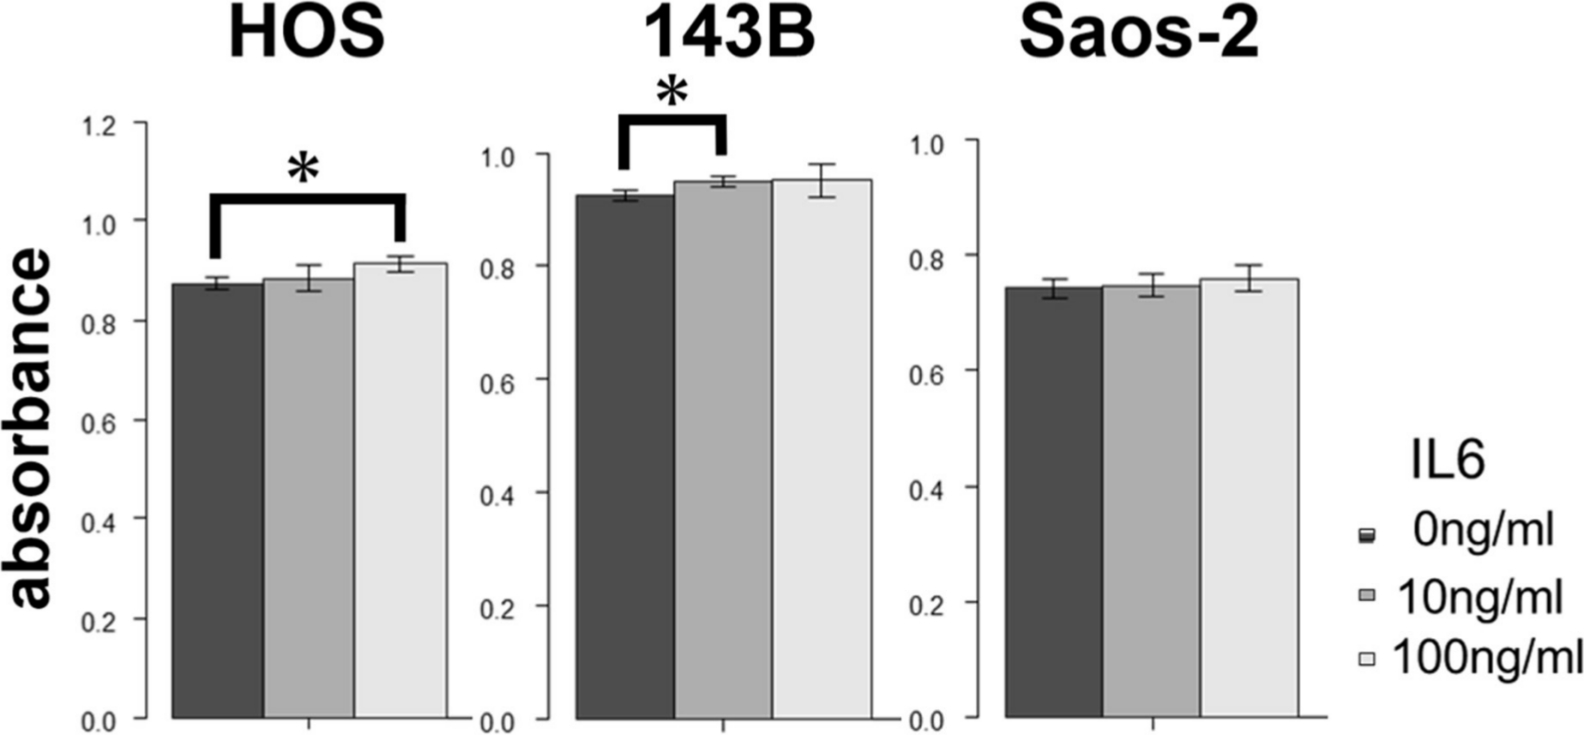 Fig. 4 
            Effect of treatment with recombinant human interleukin-6 (IL-6) on proliferation of 143B, HOS, and Saos-2 cells. *p < 0.05, Mann-Whitney U test.
          